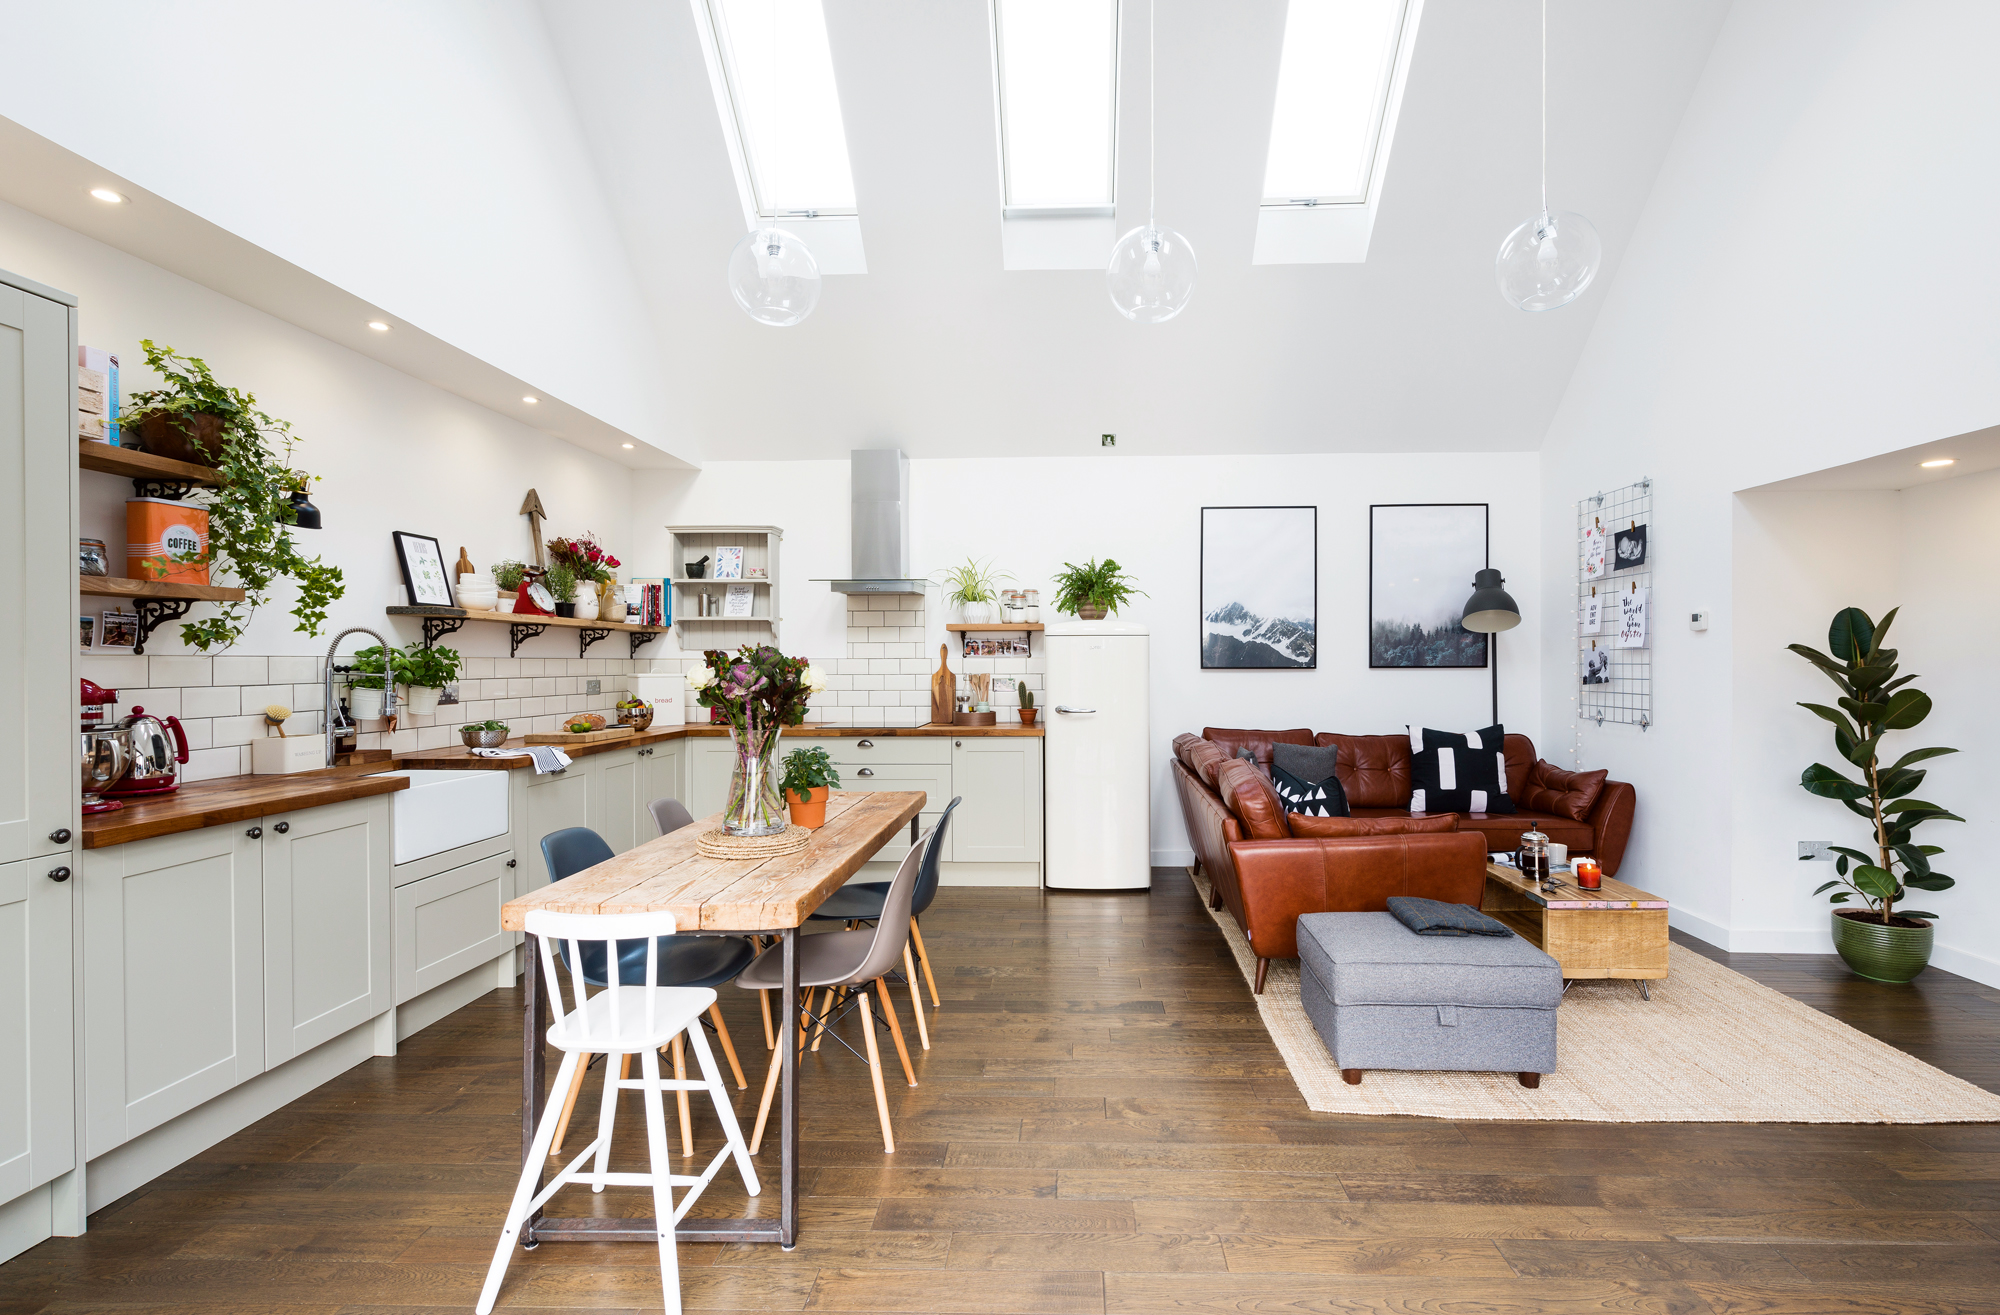 5 Space Saving Ideas for Your Next Home Renovation Project